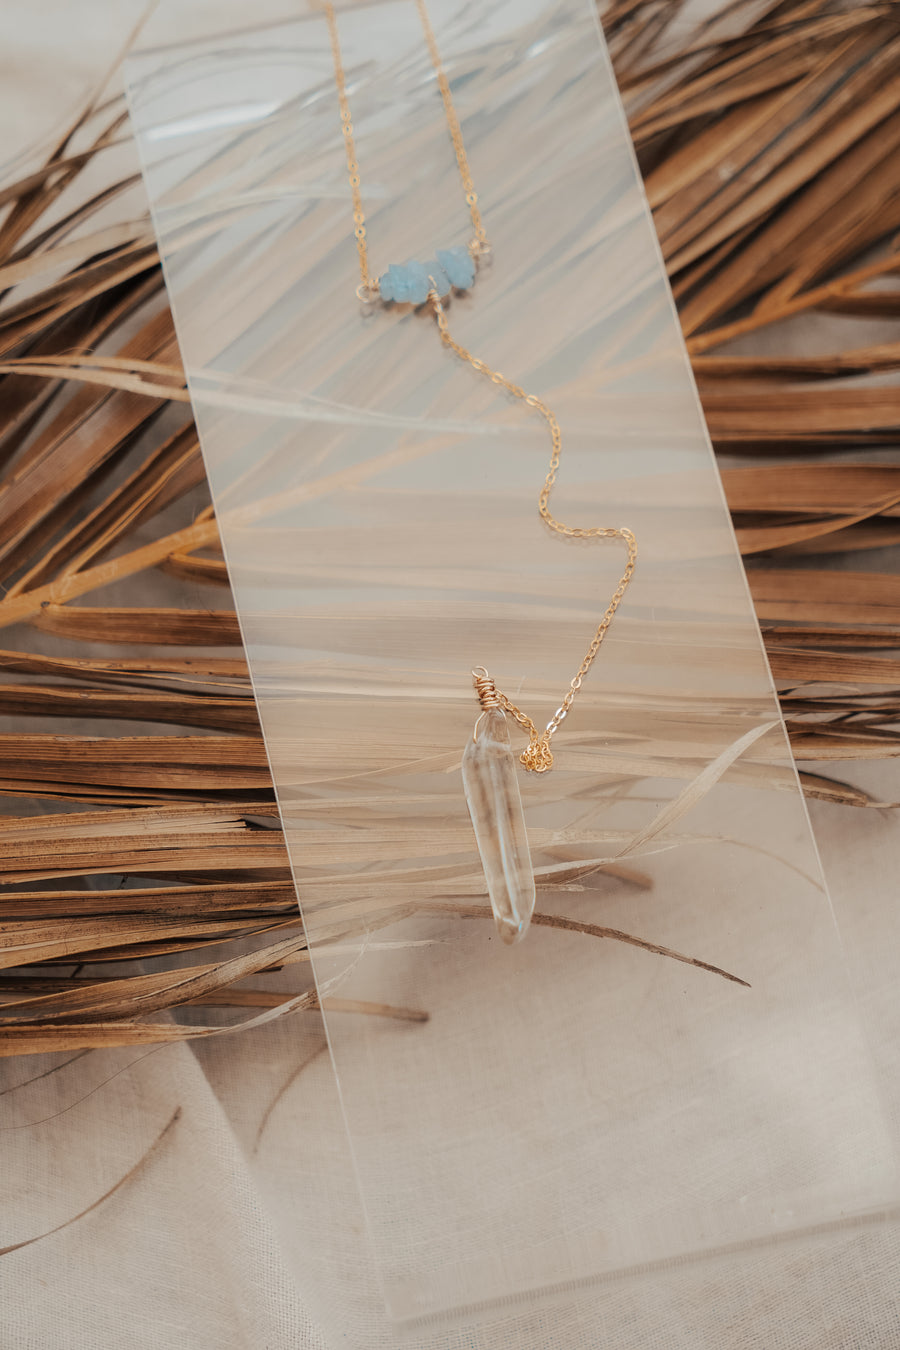 The Free Fall Lariat Necklace with Clear Crystal Quartz & Aquamarine